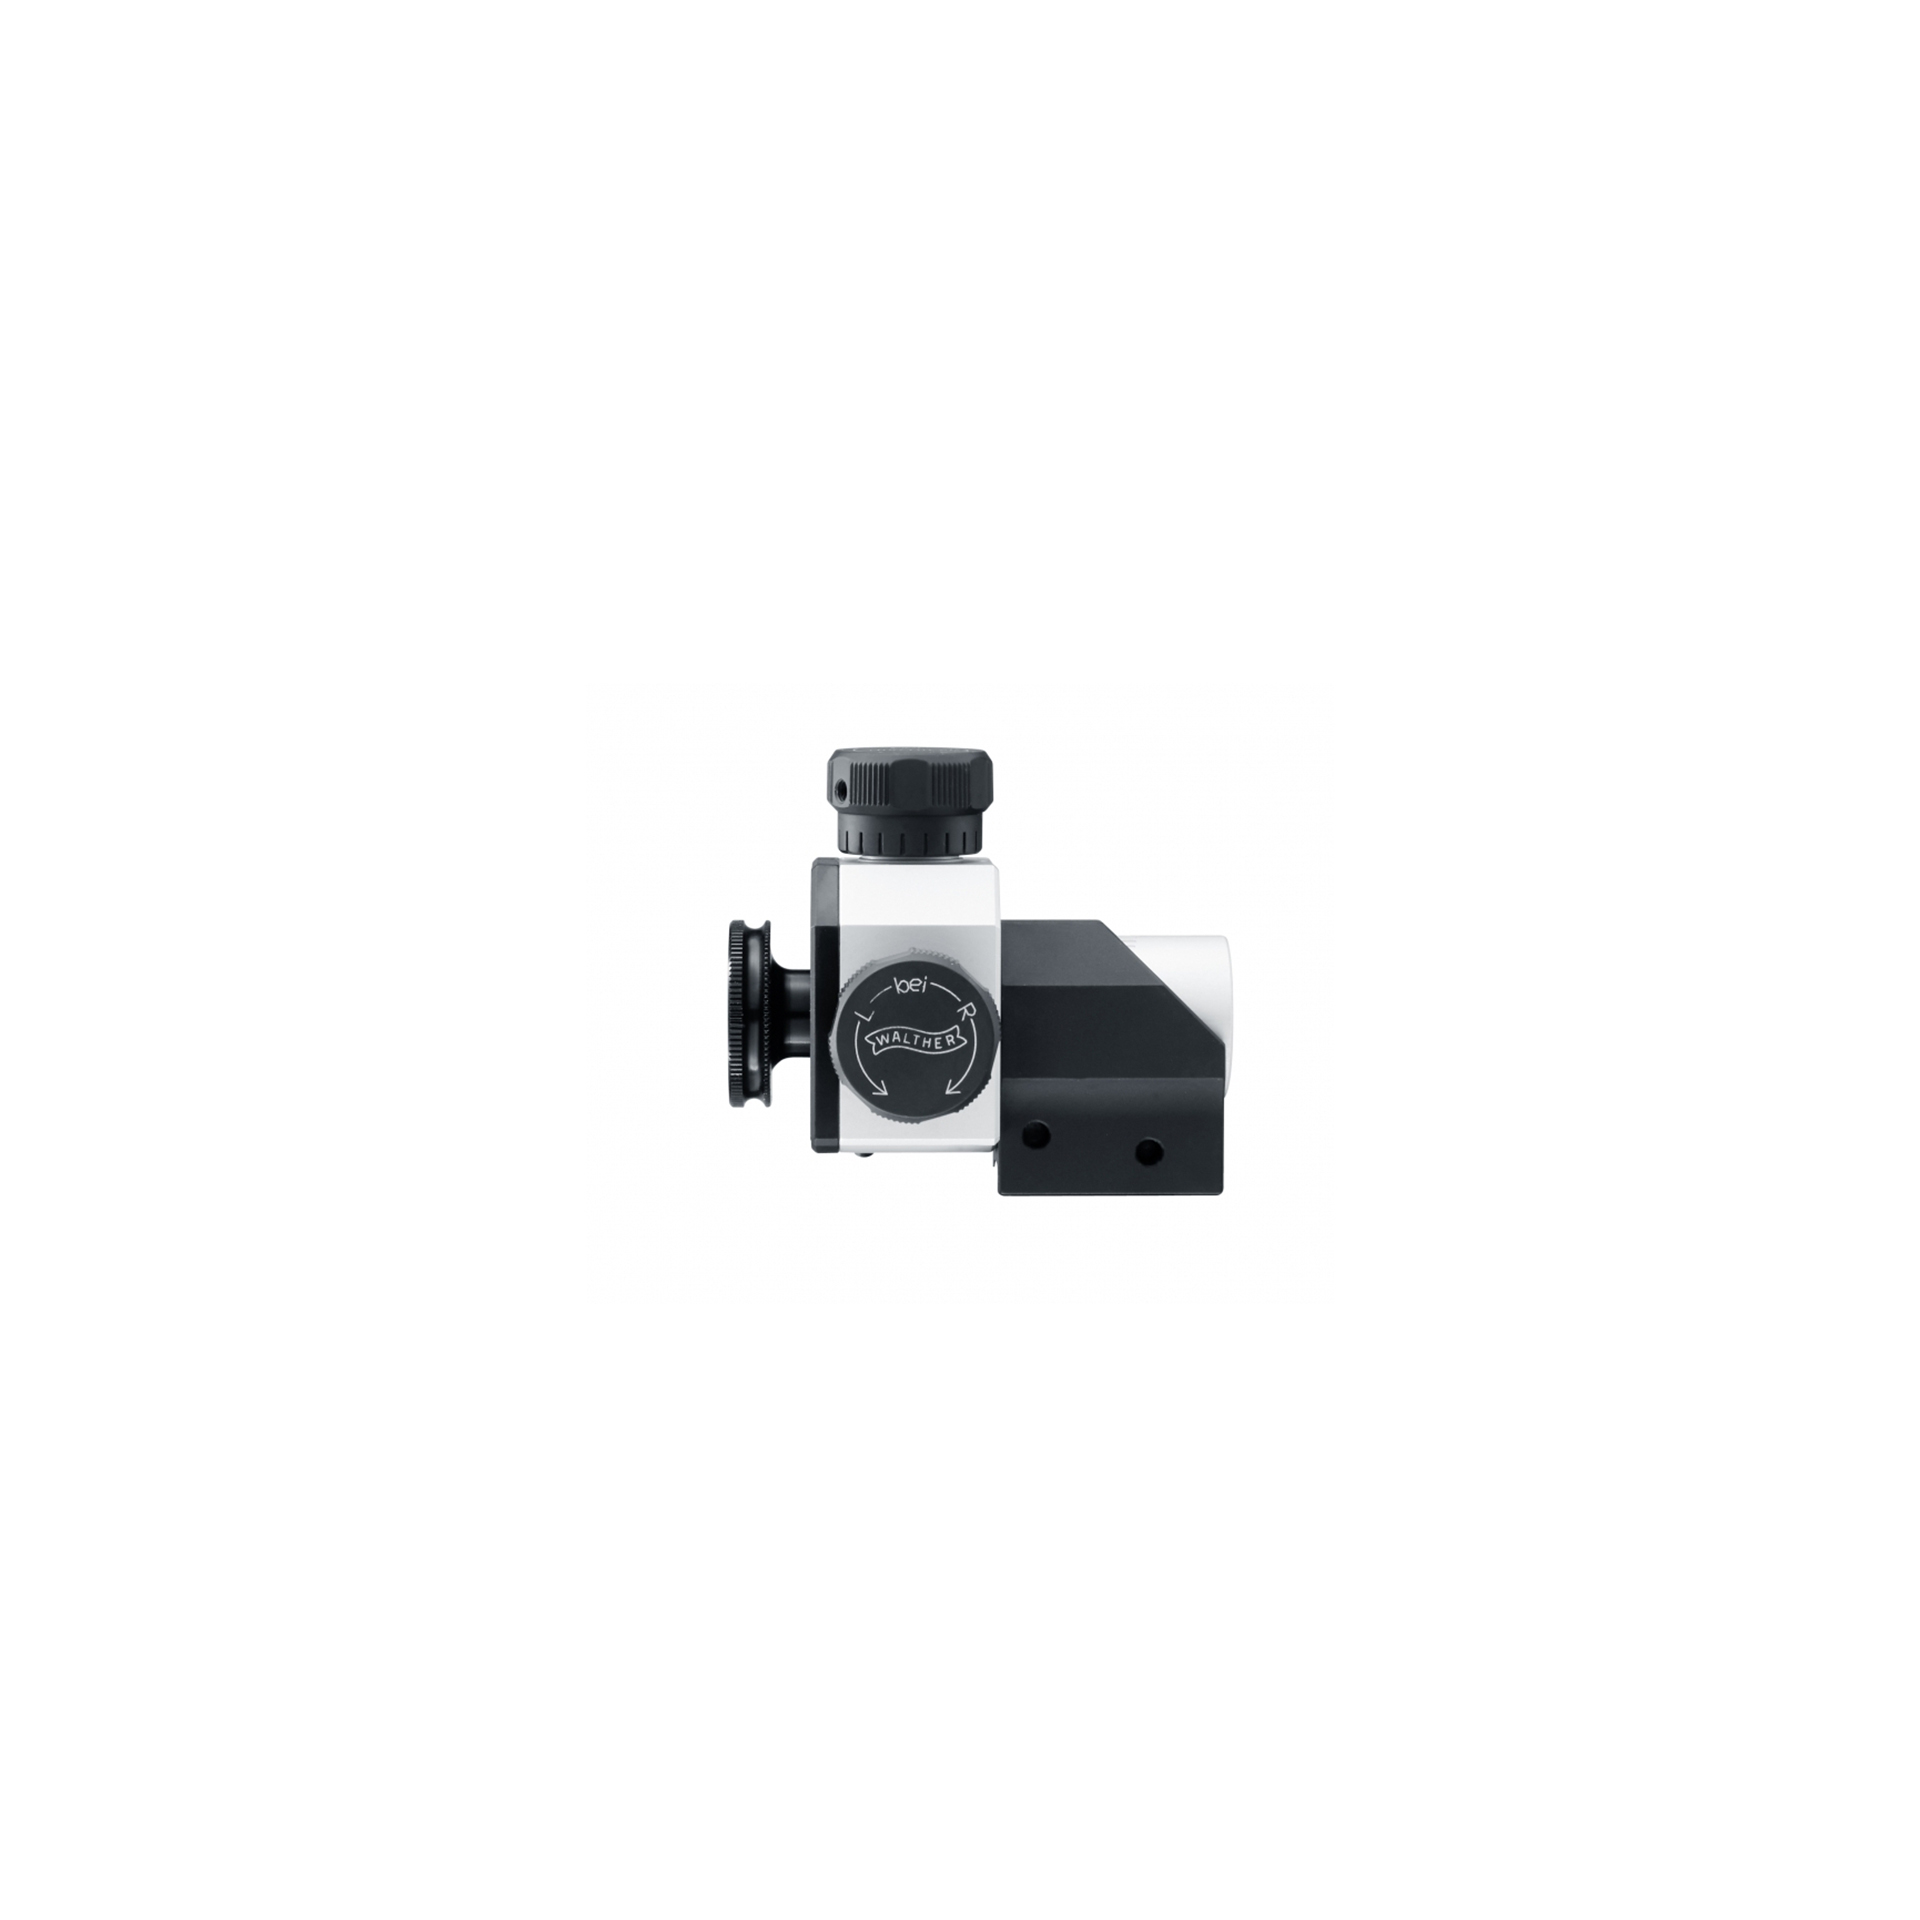 SPORT match diopter with swivel movement (2789281)